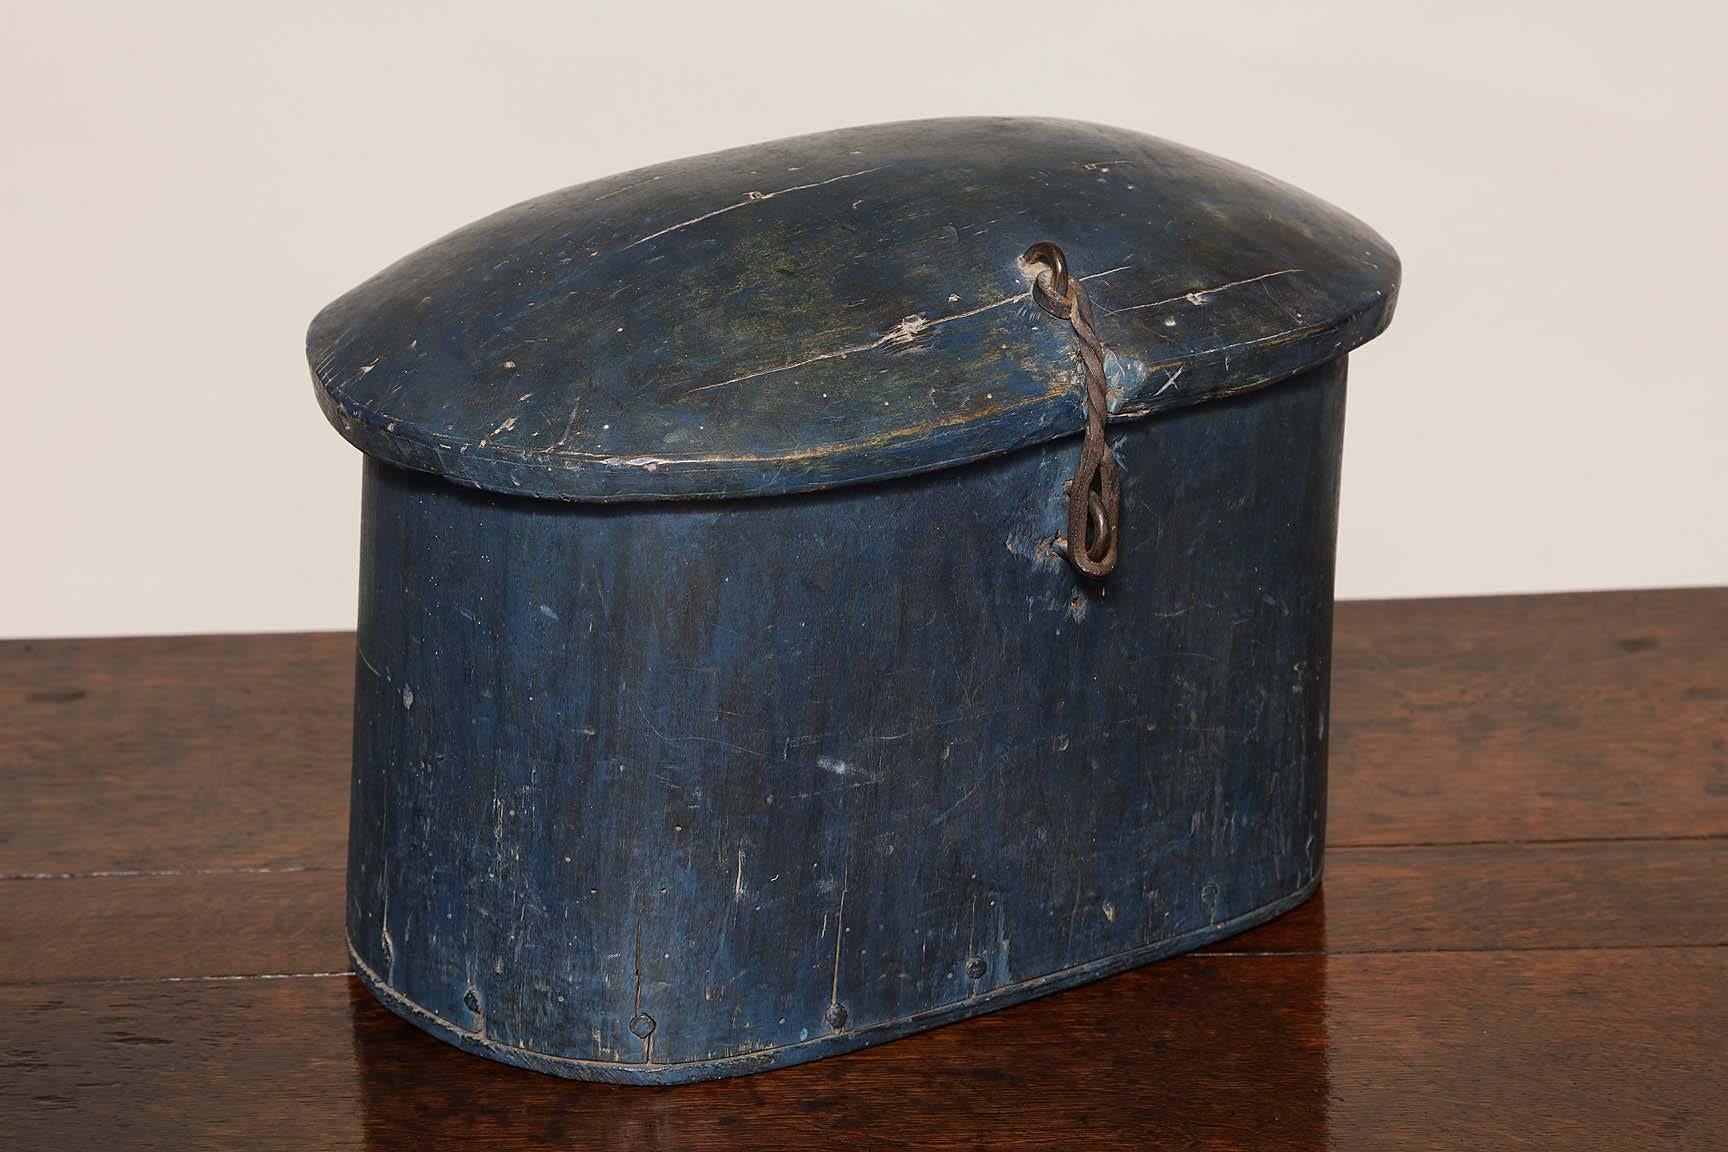 Good 18th century Norwegian dugout pantry box in beautiful original blue paint, the domed lid retaining original wrought iron strap hinges over oval body fashioned from a single hollowed out log, the base attached by pegs, the whole possessing good